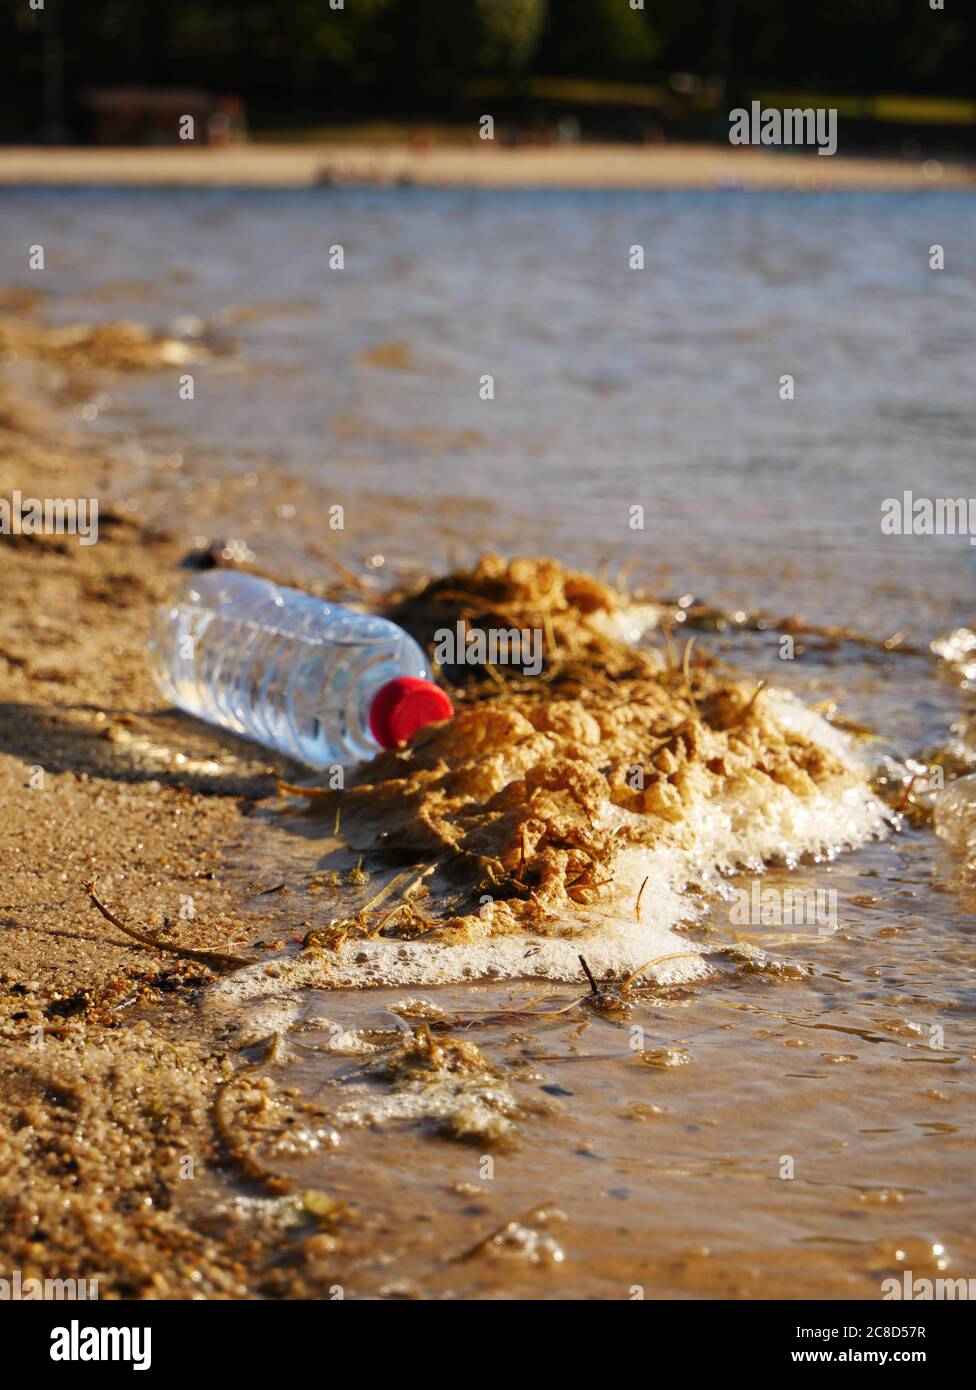 A photo that shows that we still need to educate people and take care of the planet. Stock Photo